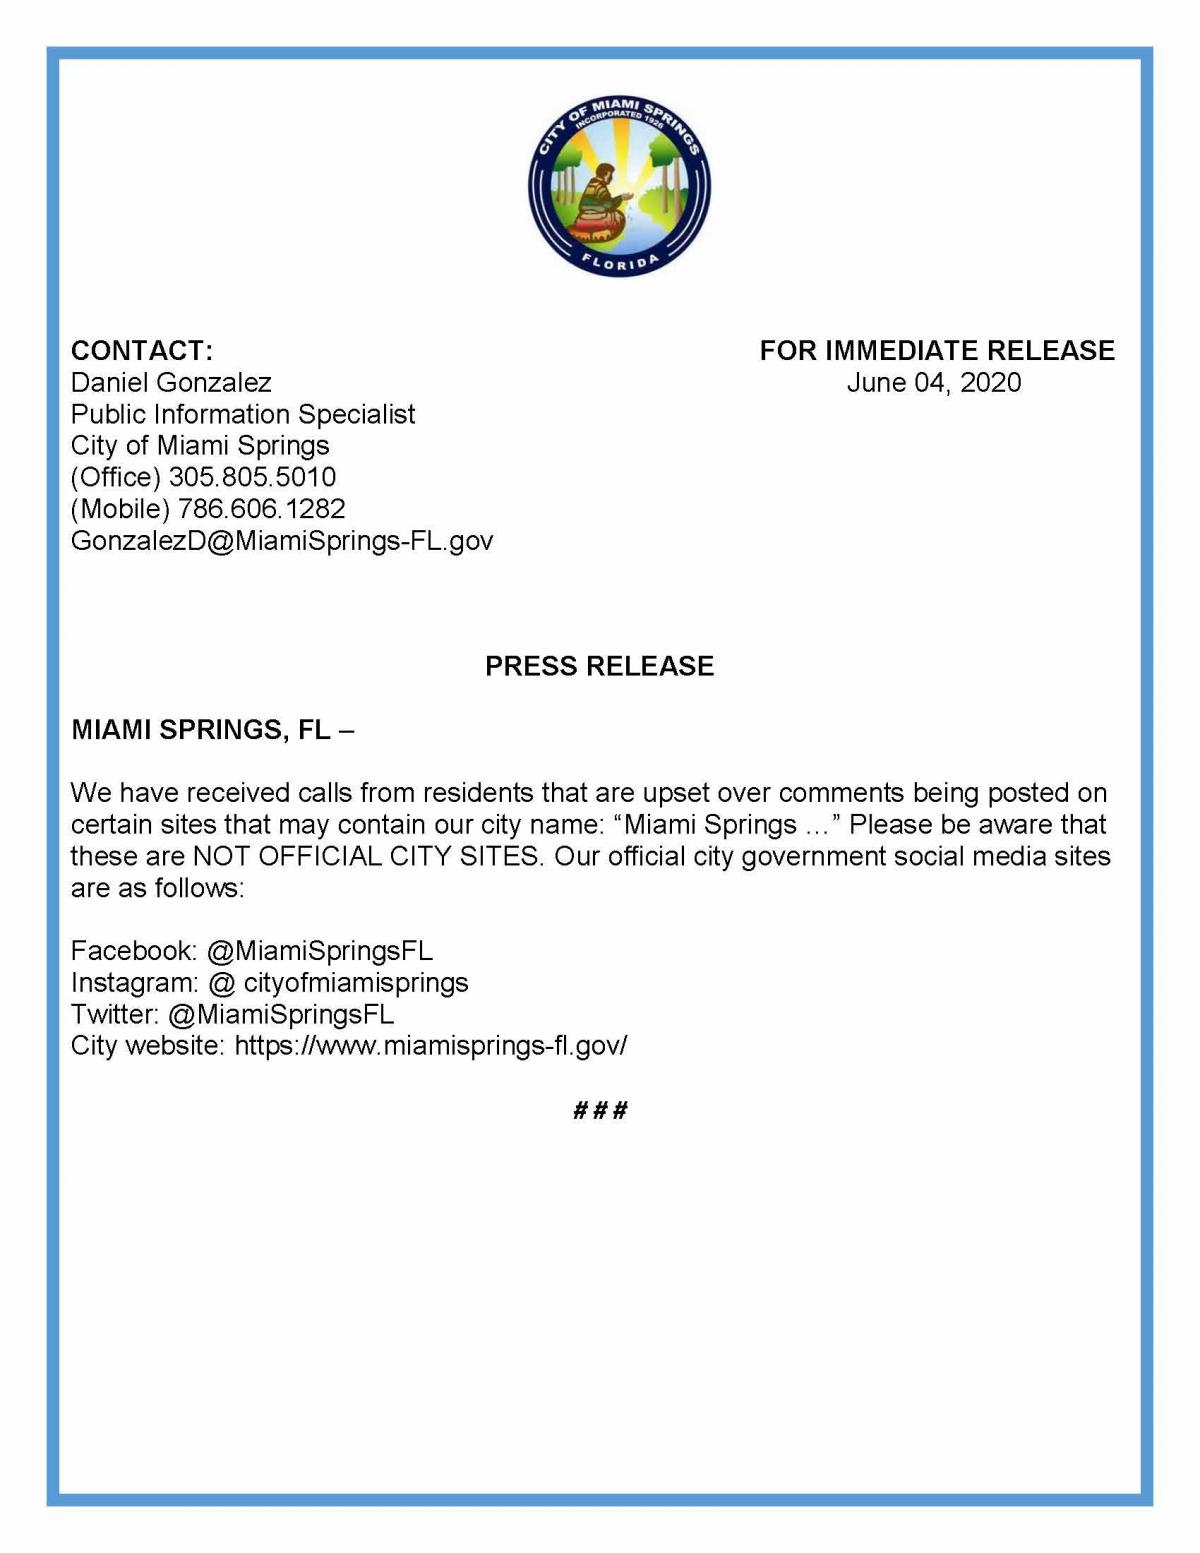 Press Release on Comments Posted on Non-Official City Websites